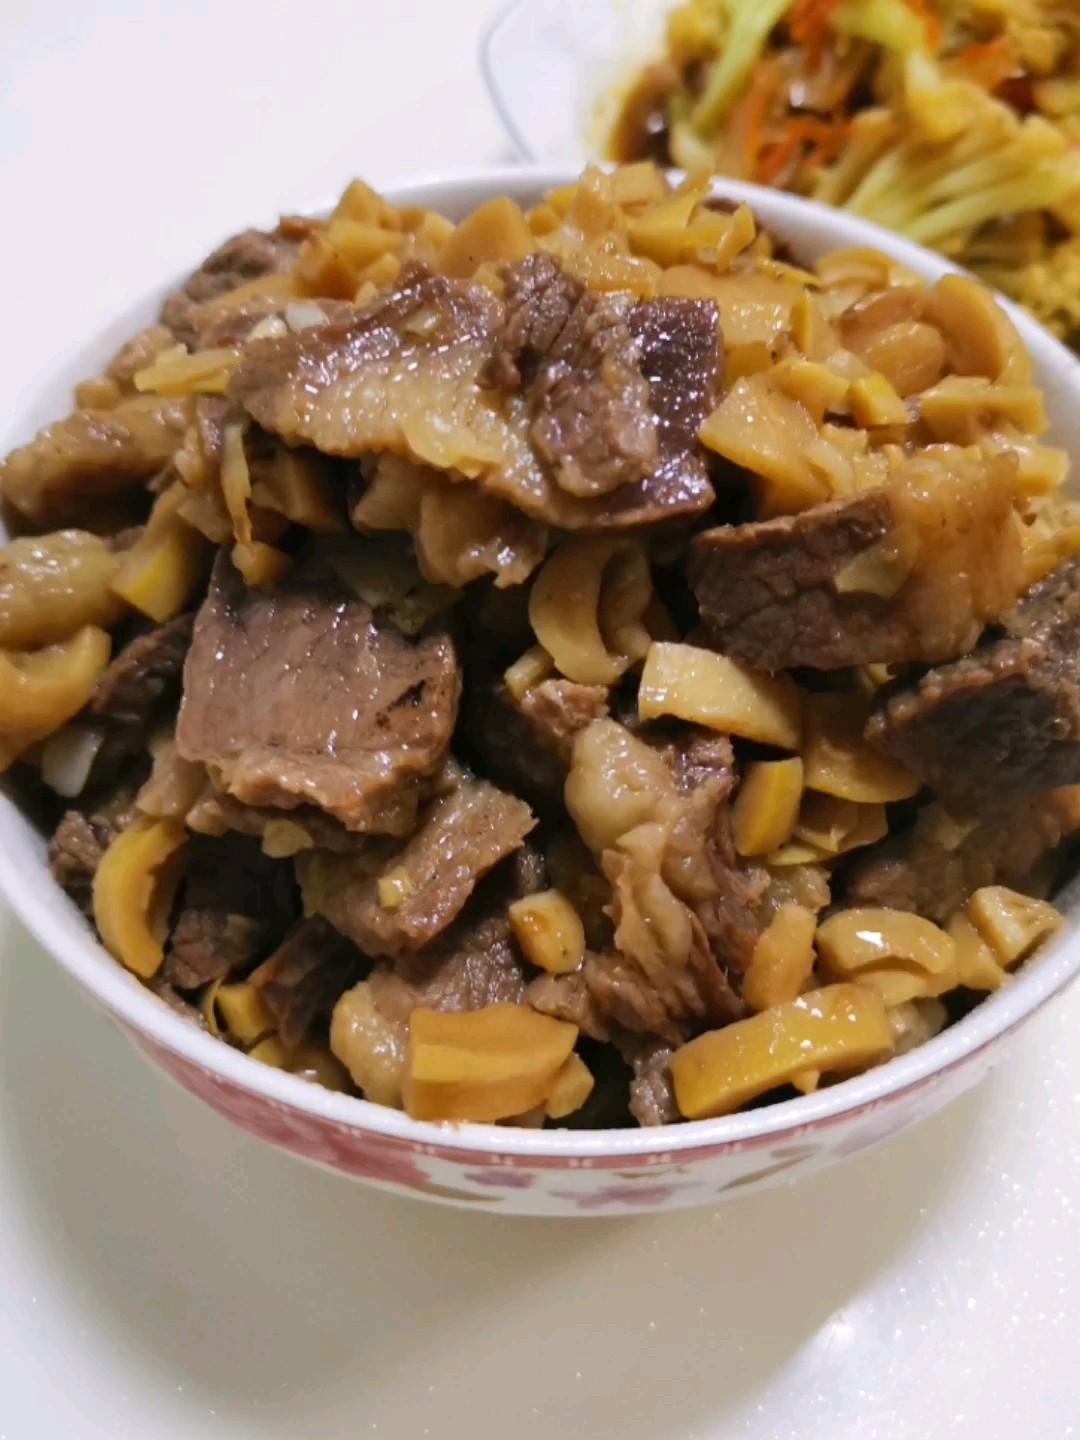 Stir-fried Beef Brisket with Spring Bamboo Shoots